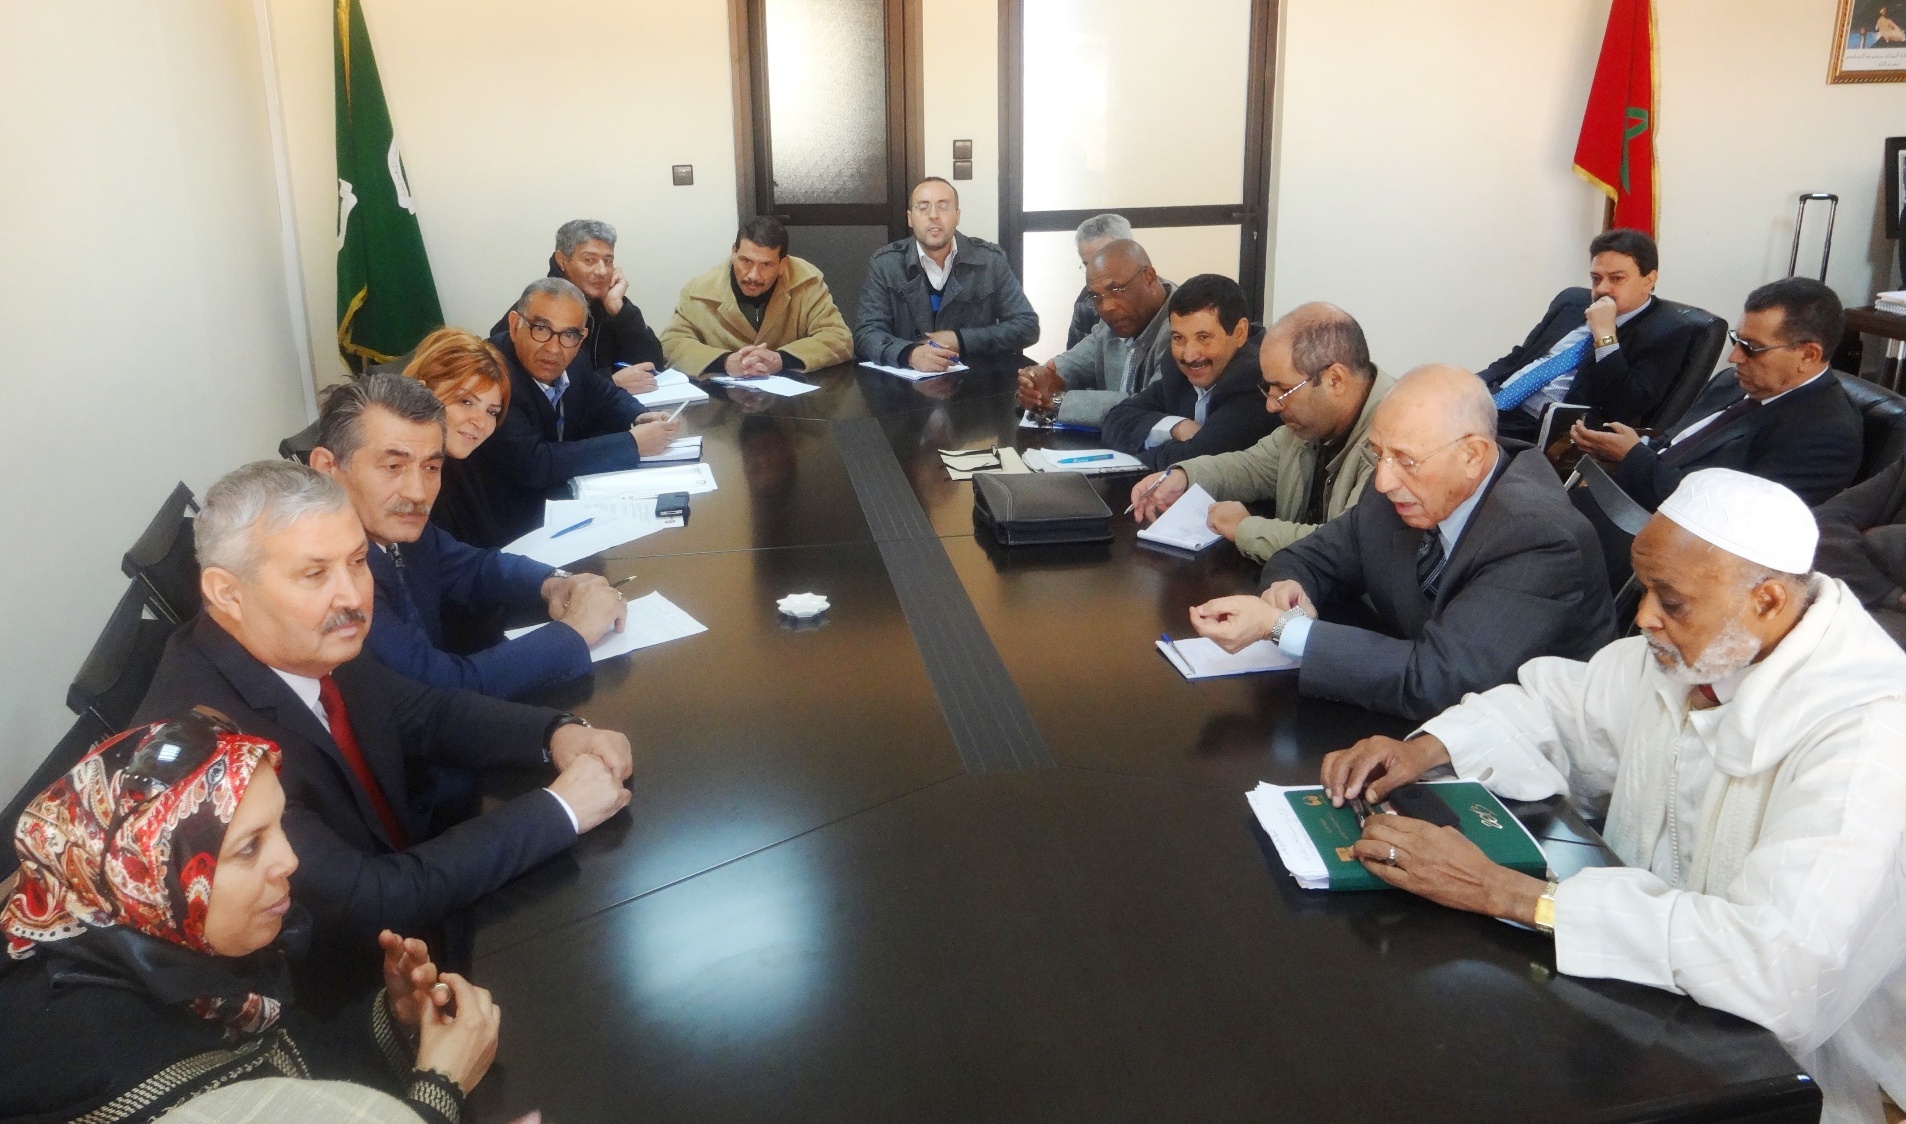 COOPERATION WITH MOROCCON FEDERATION OF AGRICULTURE